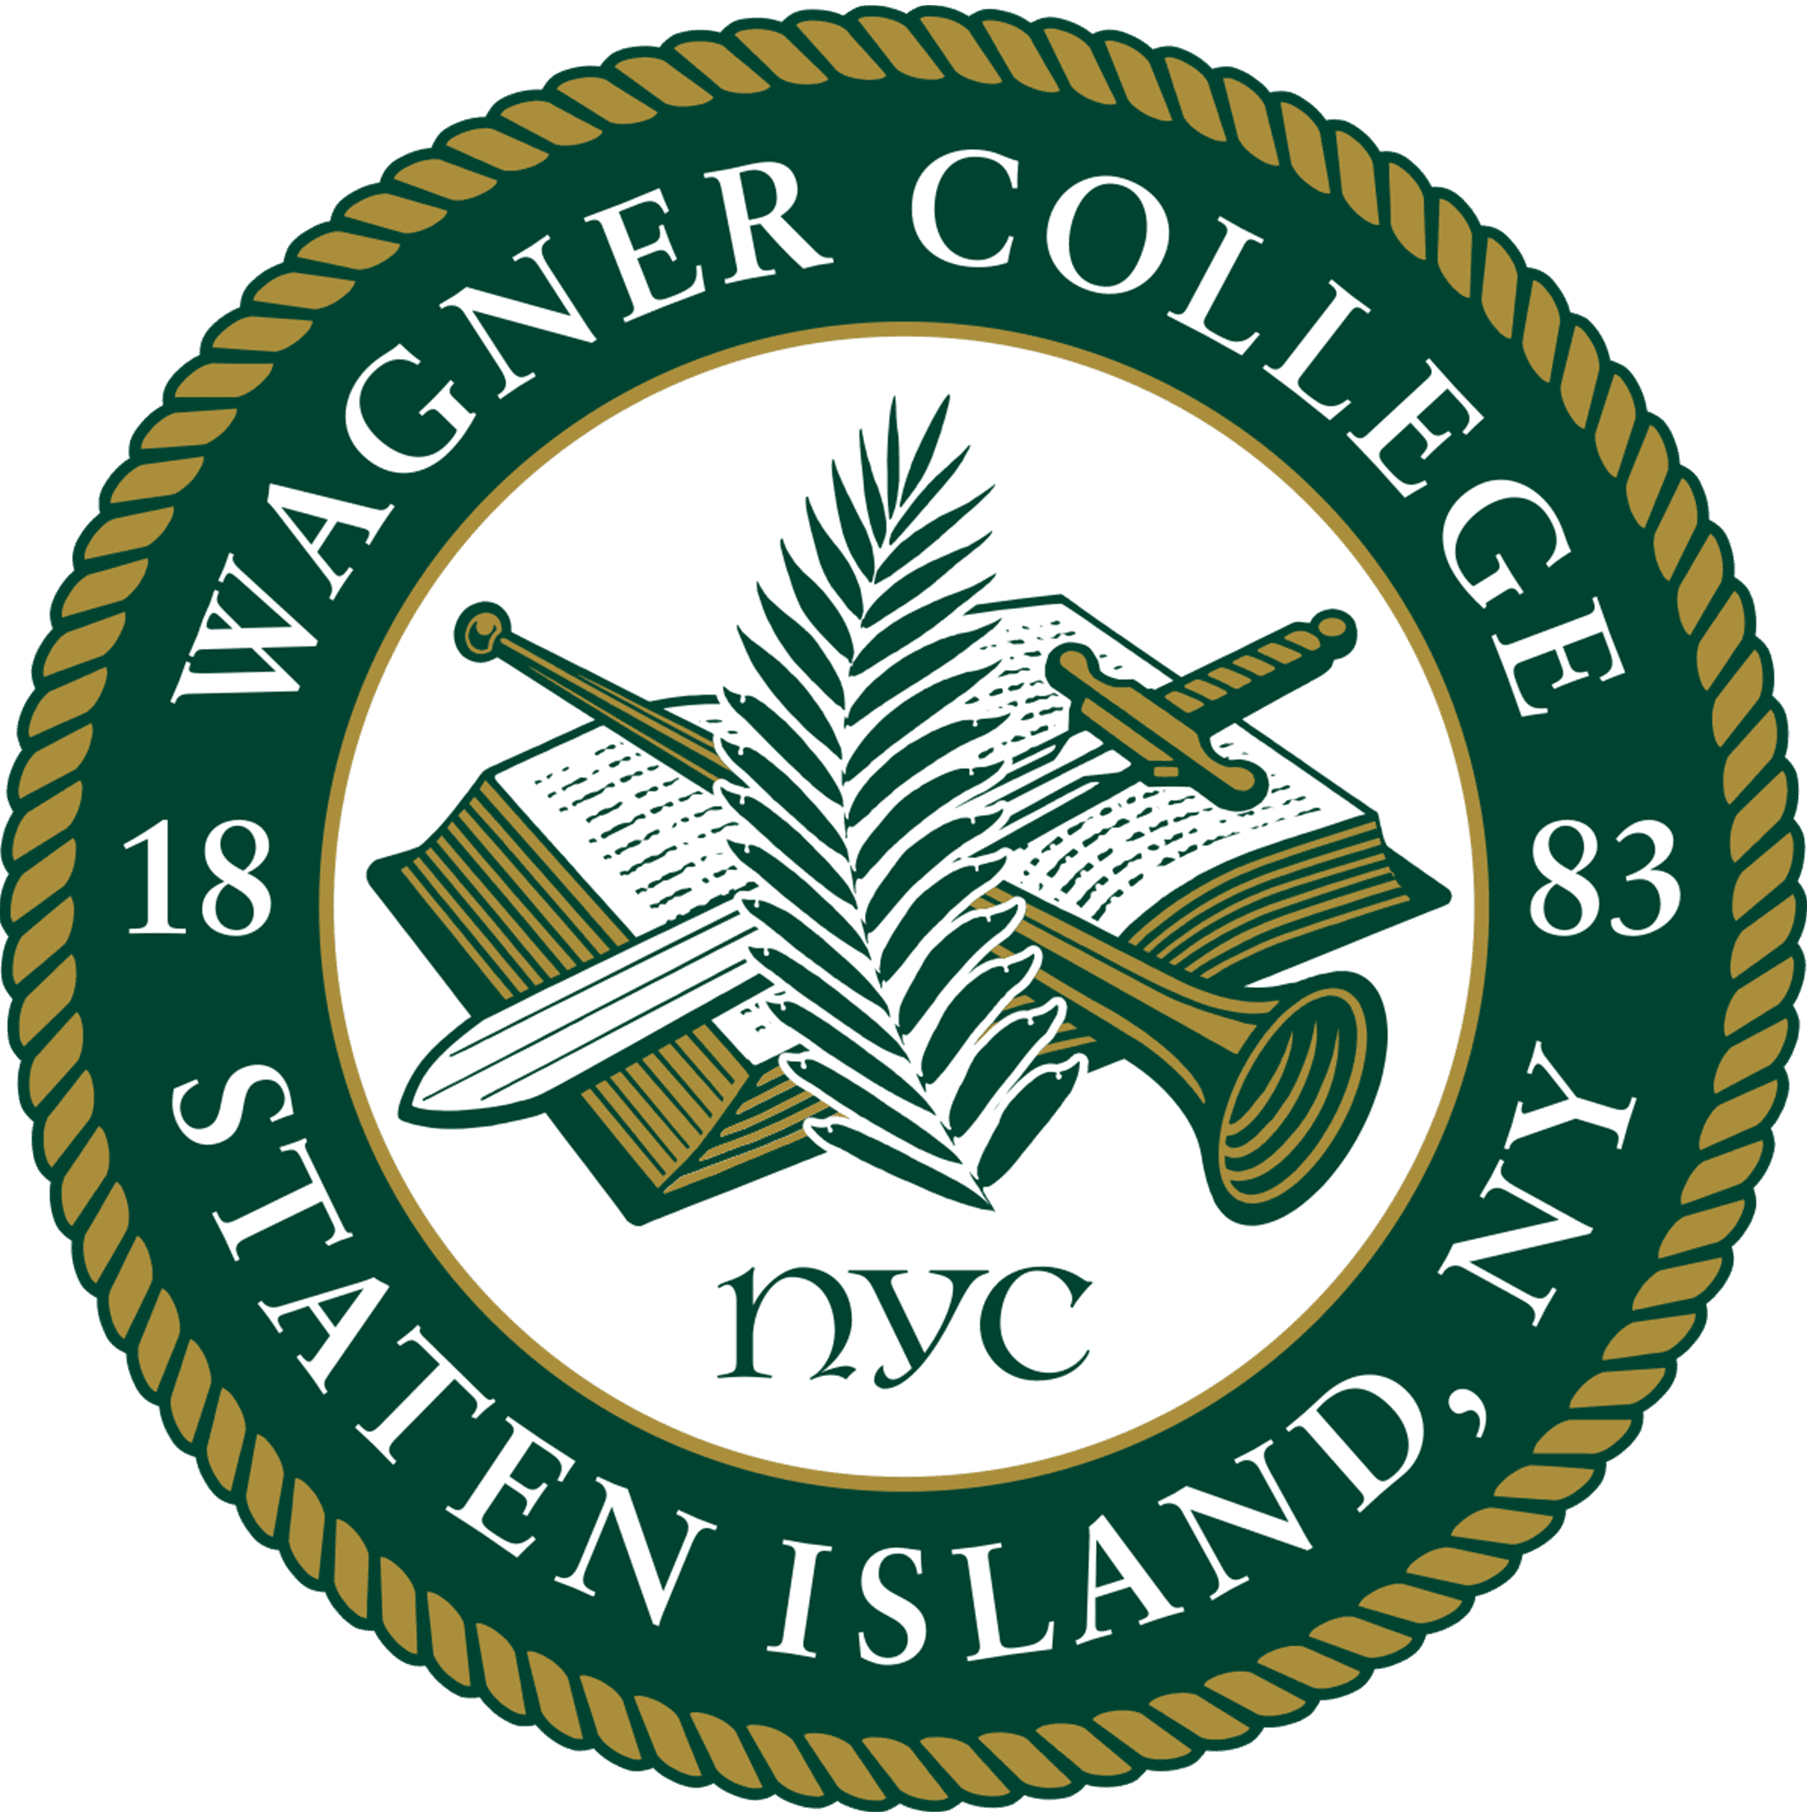 Wagner college